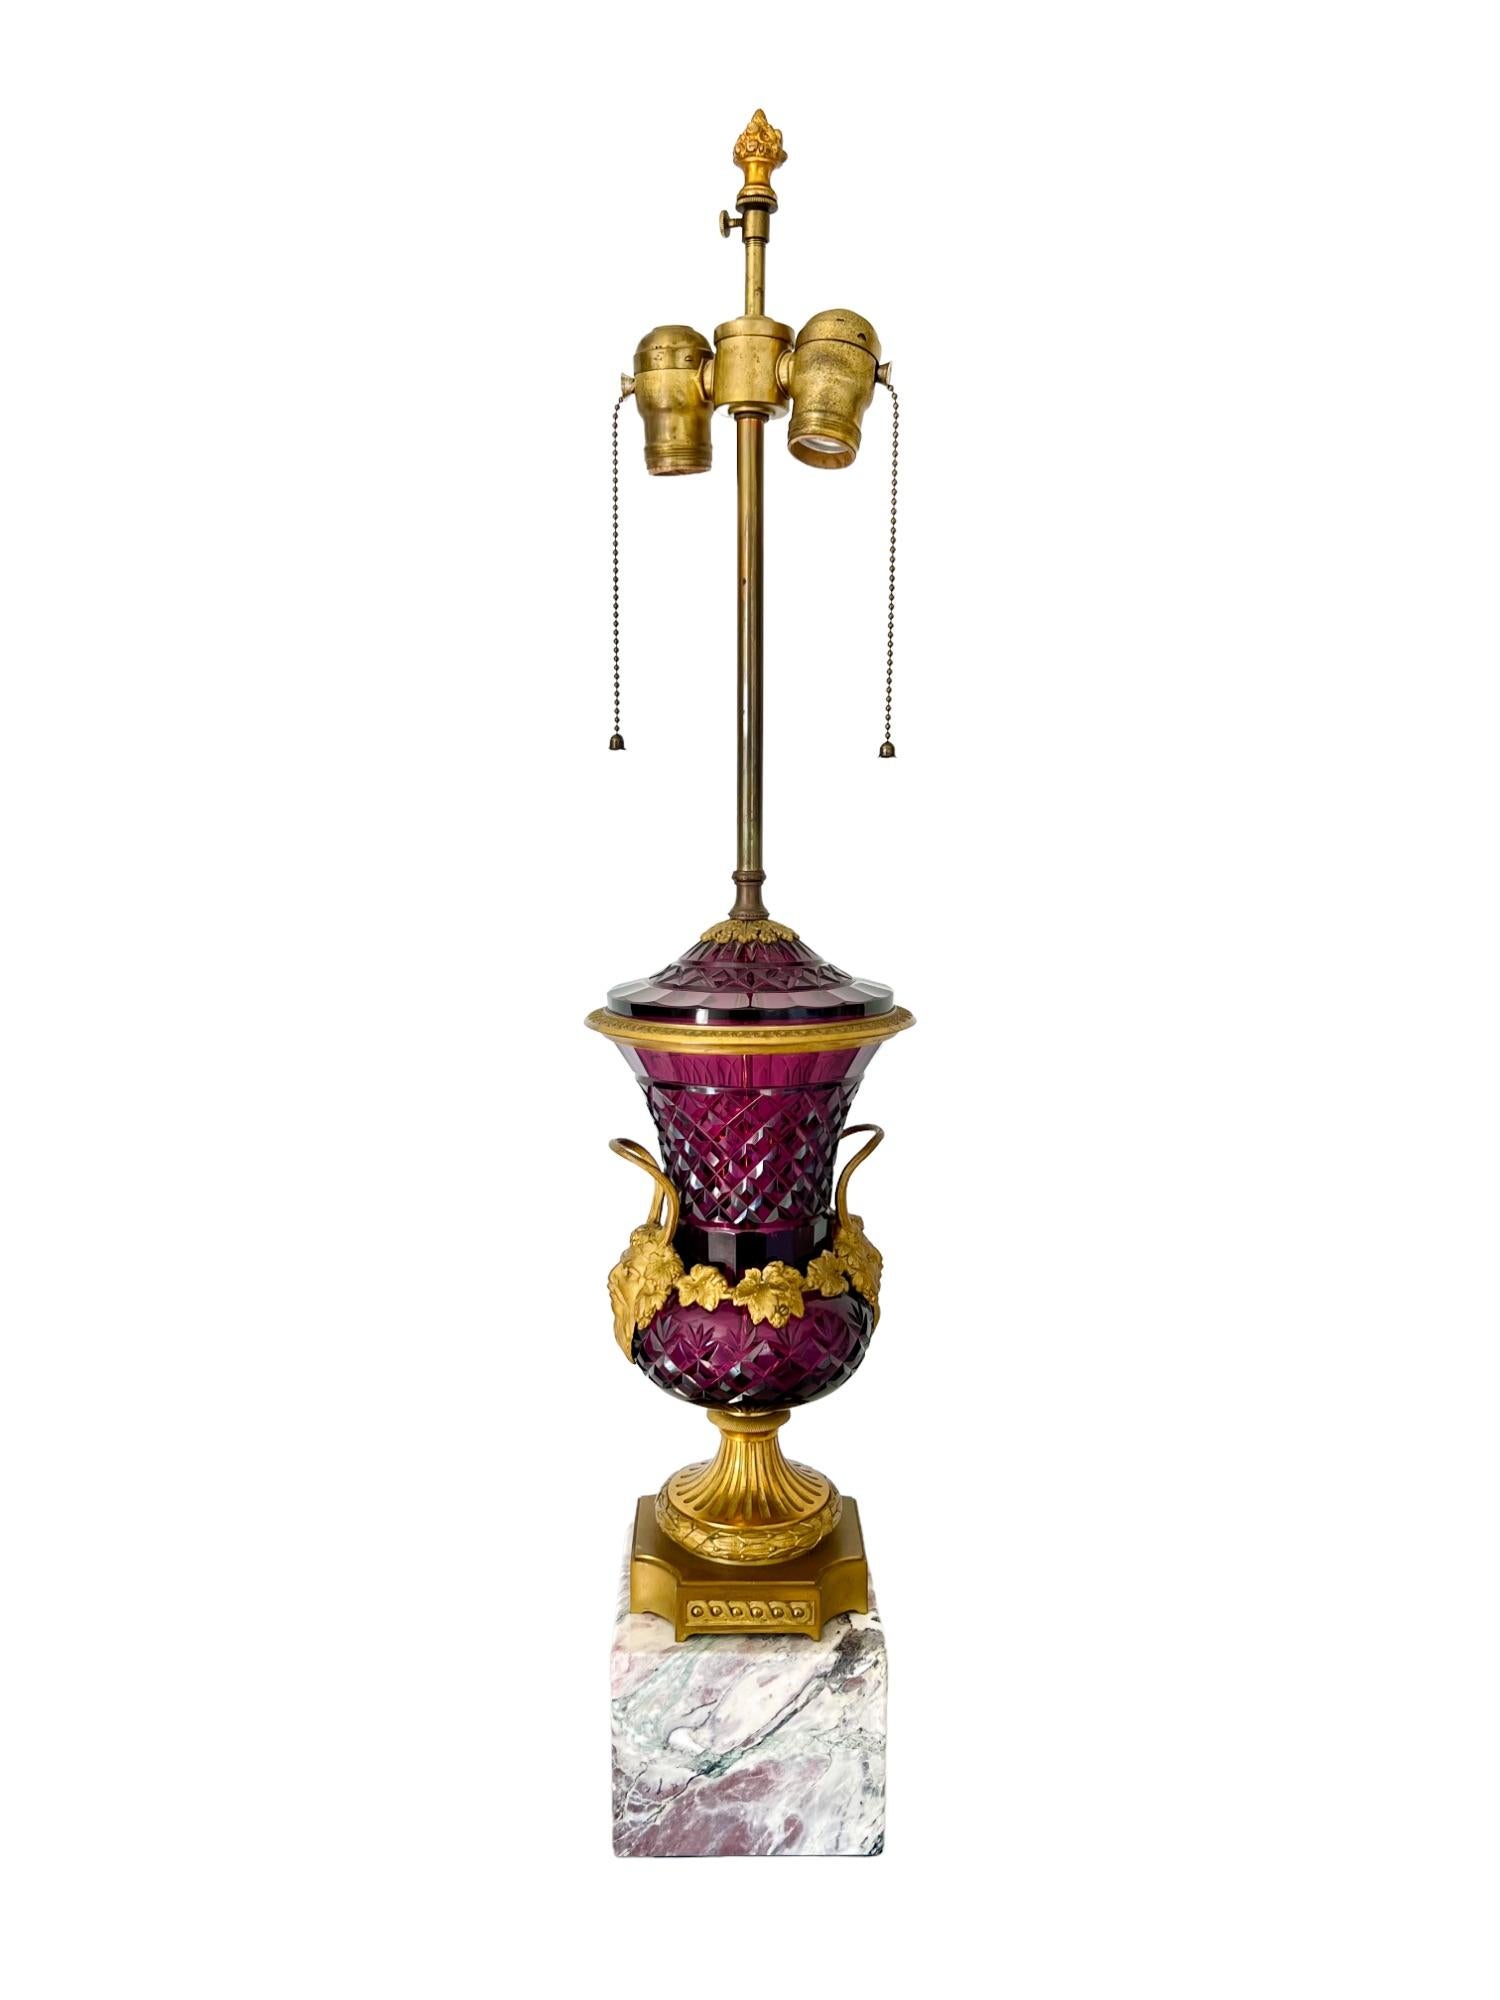 Austrian Ormolu Mounted Amethyst Glass Campana Urn Lamp, Late 19th C In Good Condition For Sale In Harlingen, TX